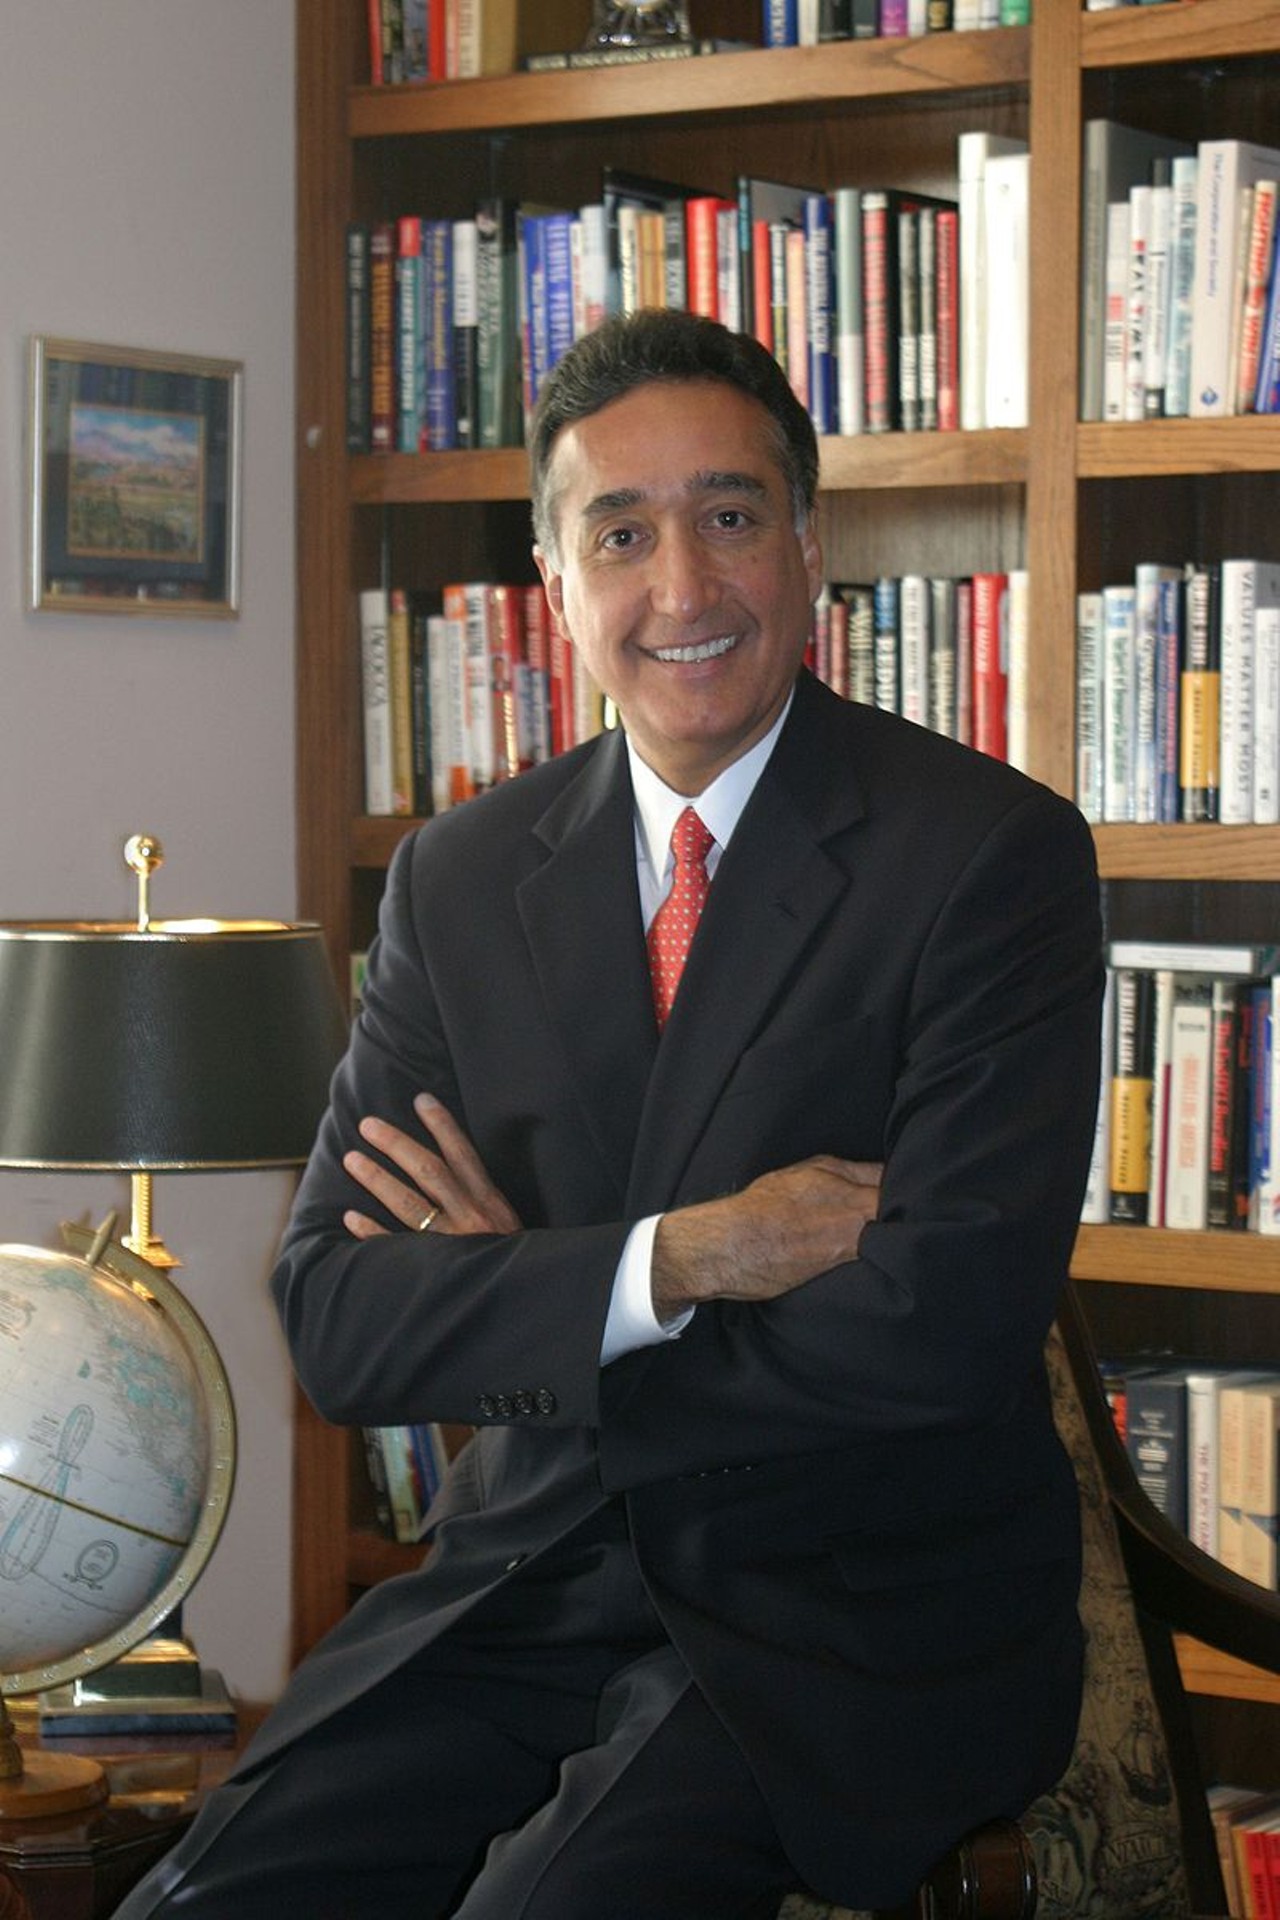 Henry Cisneros
Beloved to San Antonians, particularly older generations, Henry Cisneros is a part of SA history forever. He served as mayor of the Alamo City from 1981 to 1989 — making him just the second Latino mayor of a major American city. Not only that, but he was also the city’s first Latino mayor since Juan Seguin in 1842. After serving SA, he also held a position as the Secretary of Housing and Urban Development under President Bill Clinton. Still, he definitely won’t get the same star treatment outside of SA.
Photo courtesy of Henry Cisneros